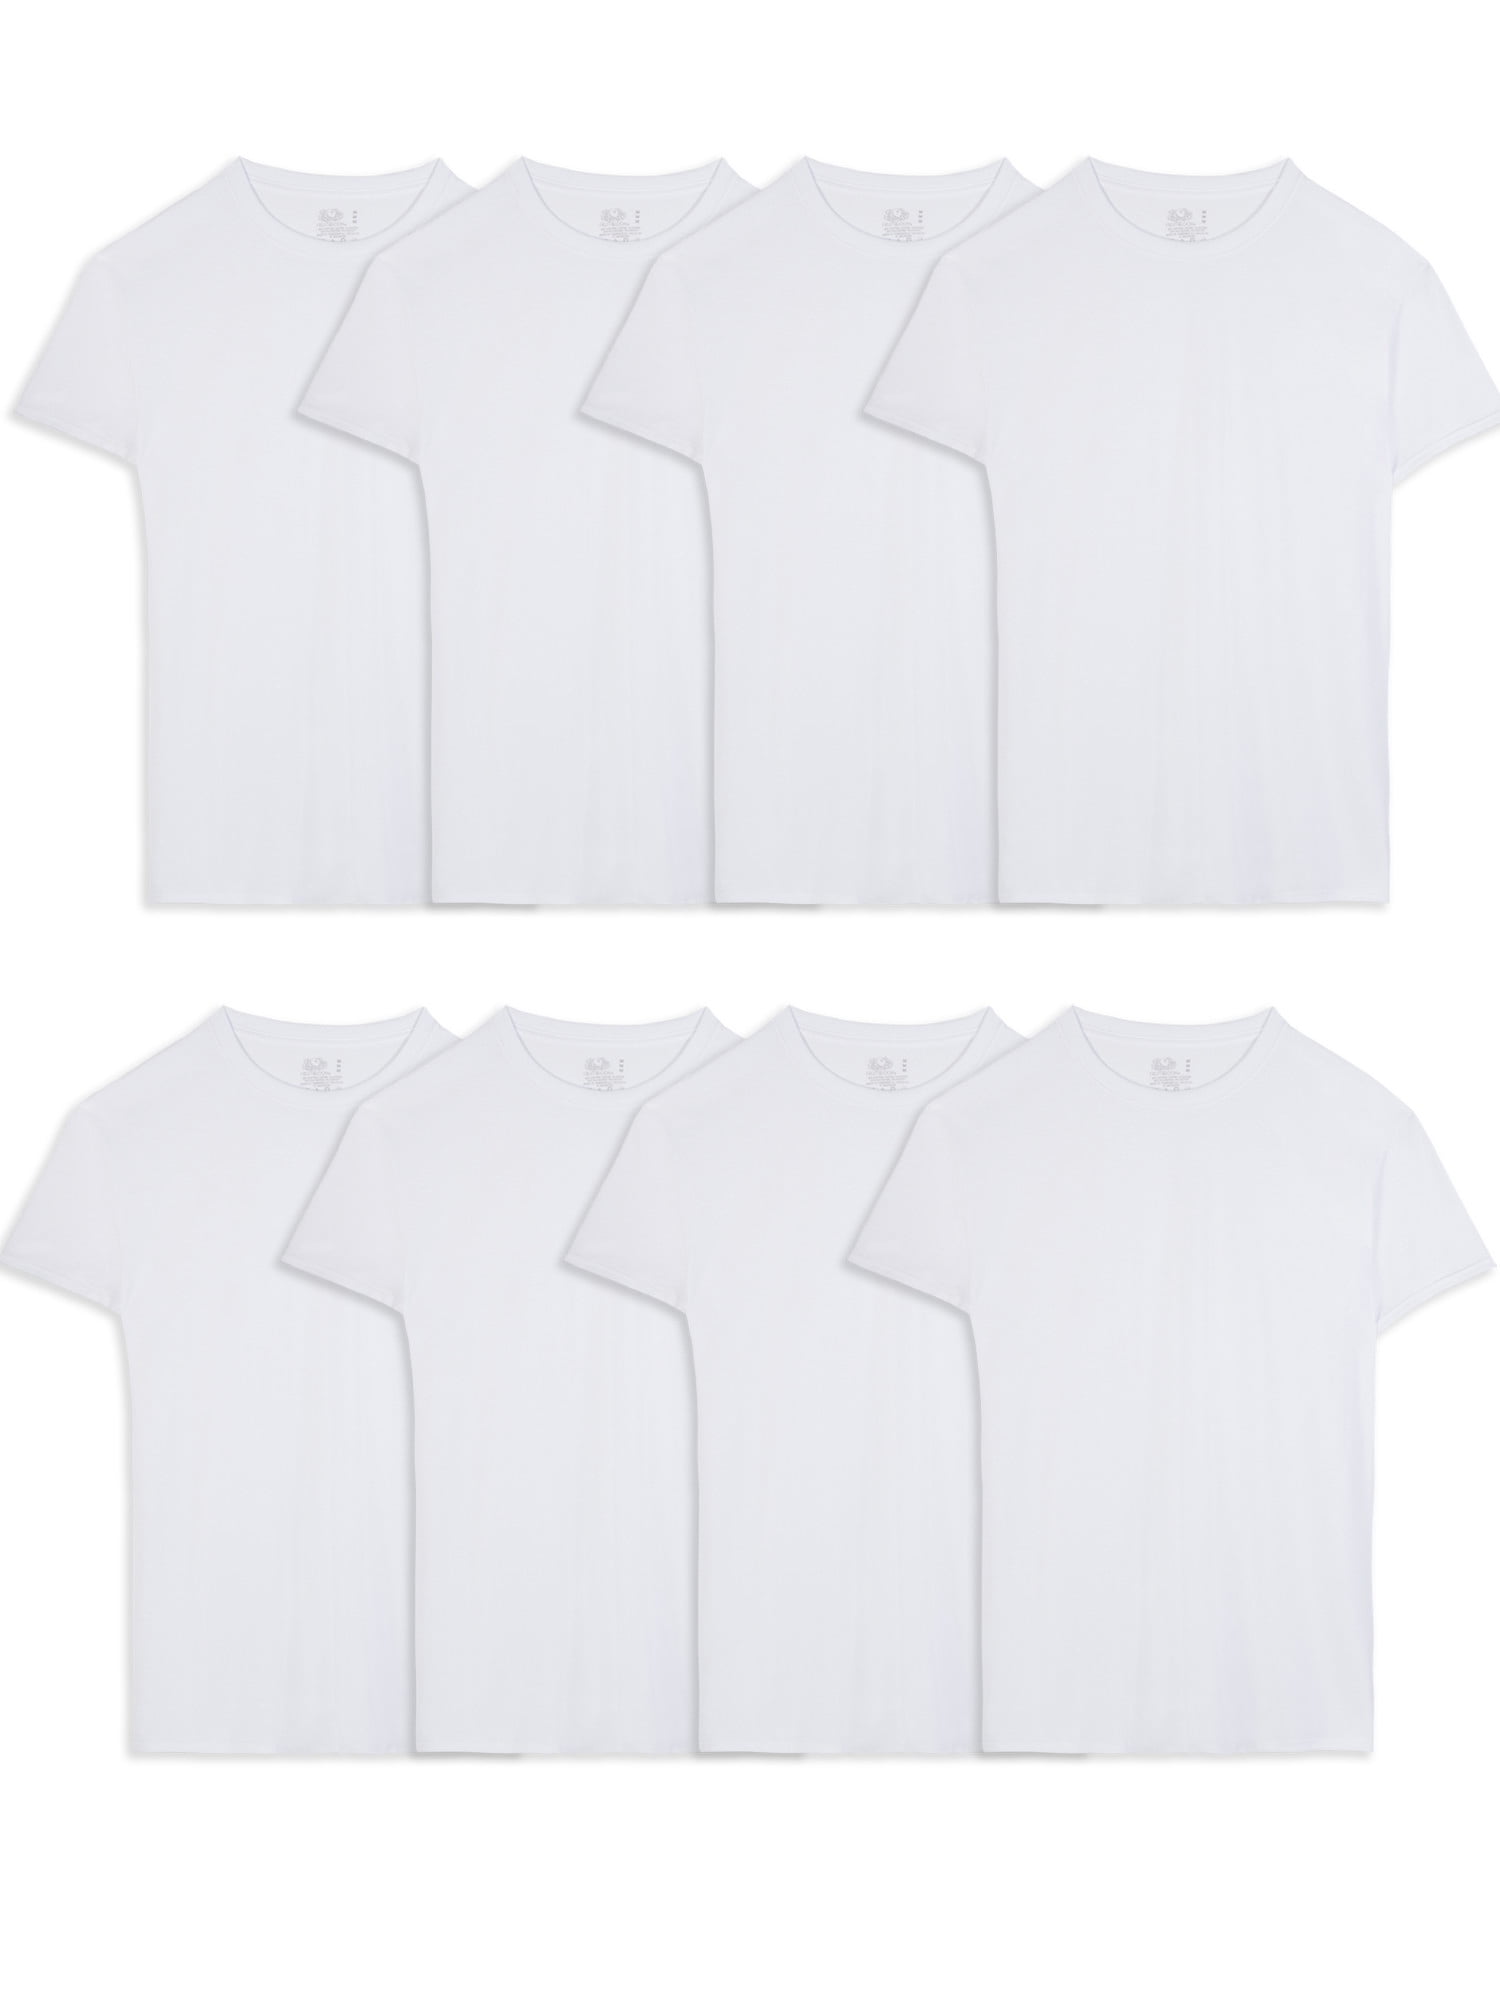 Fruit of the Loom Men's Active Cotton Blend White Crew Undershirts, 8 ...